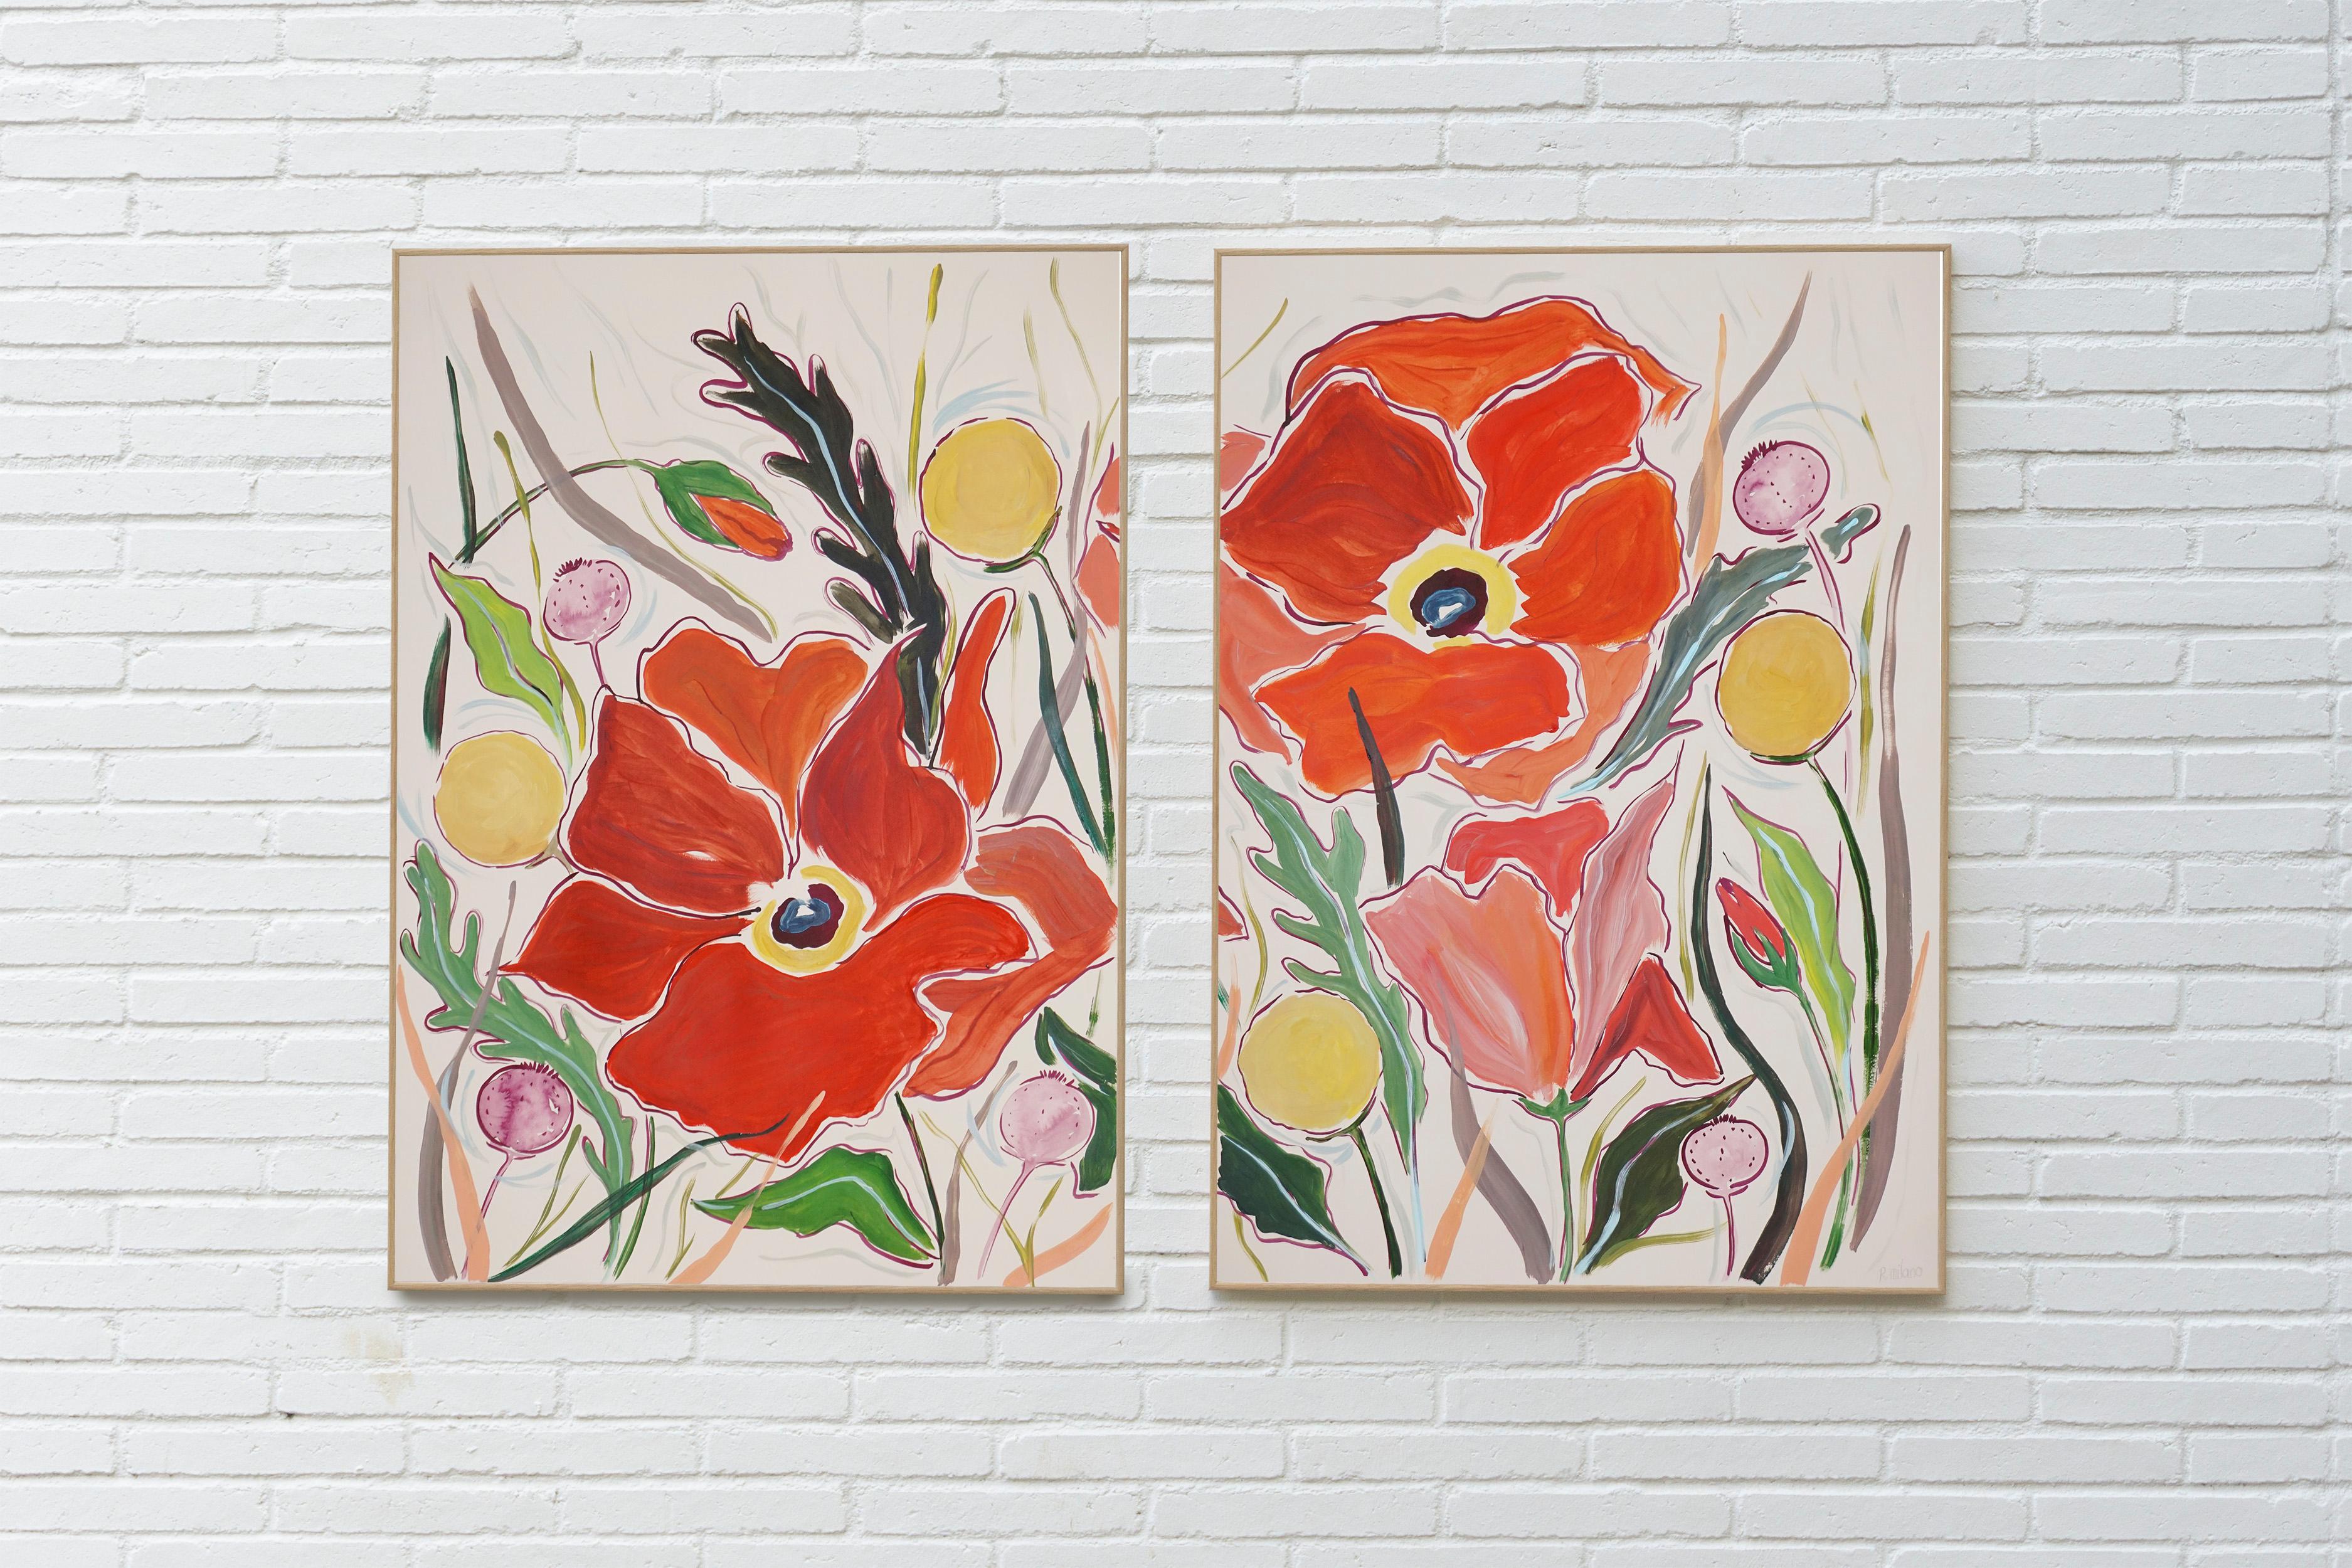 Large Red Poppy Flowers Diptych with Yellow Wild Craspedia Bloom, Illustration  - Naturalistic Painting by Romina Milano